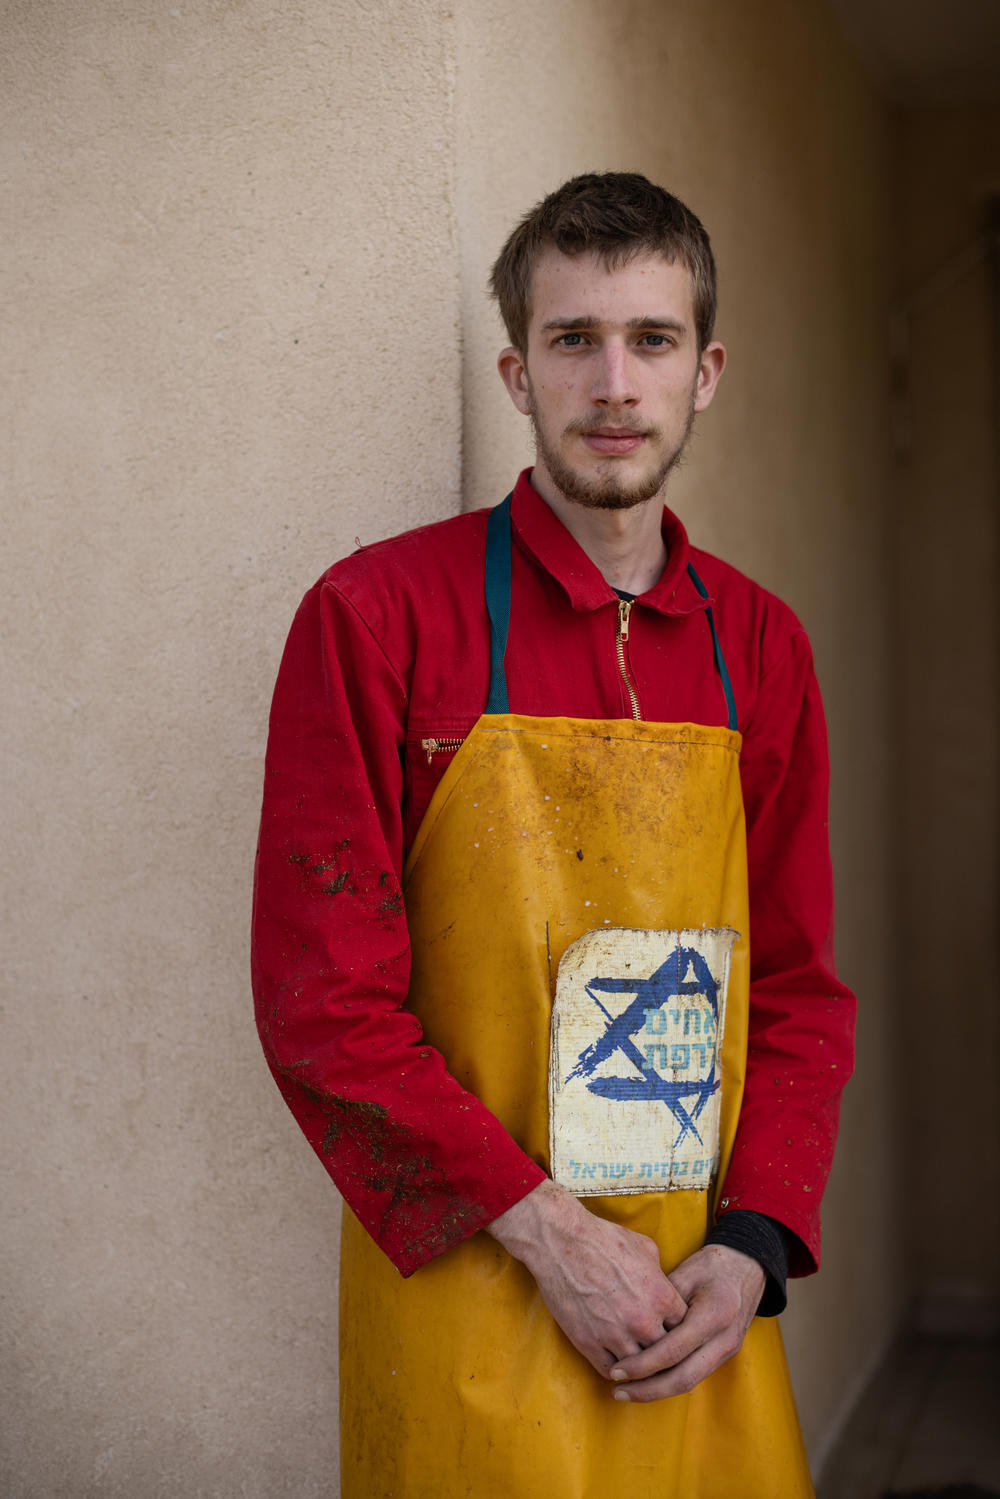 Nathaniel Willemse is a law student from the Netherlands and is volunteering at the dairy farm.